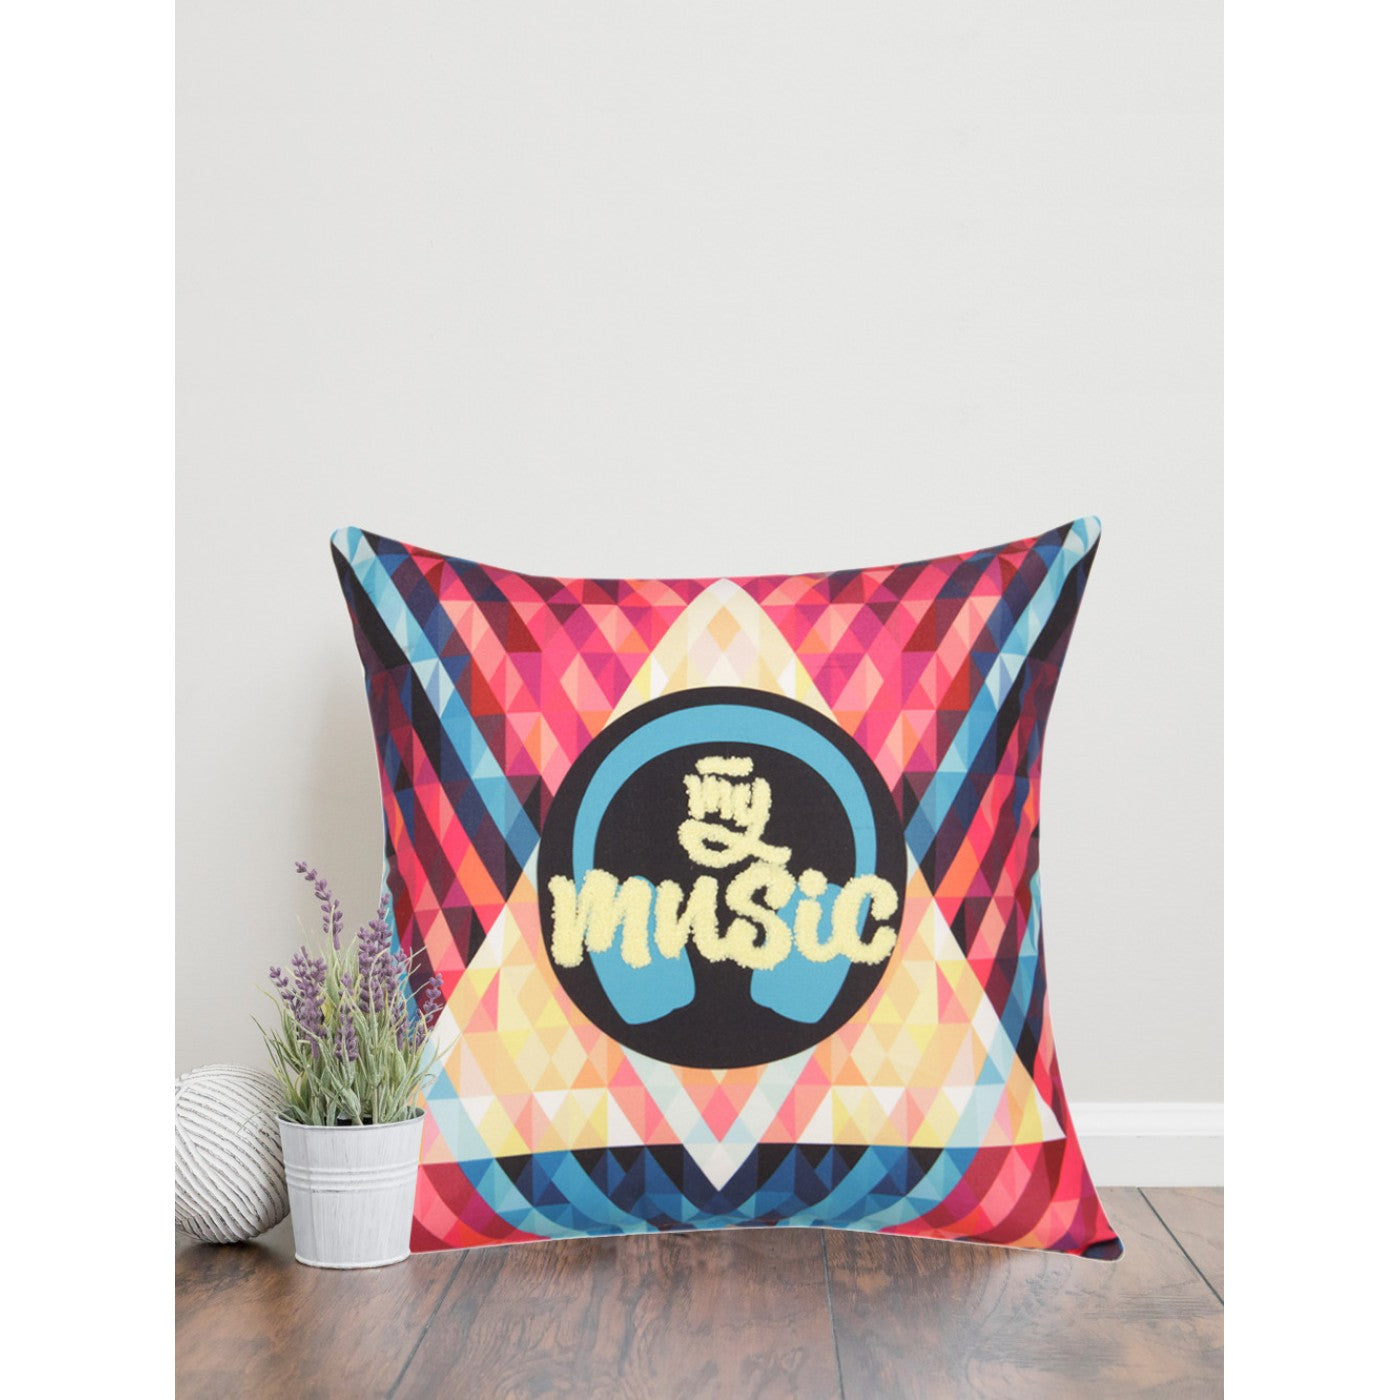 Music Printed Cushion Cover 16x16 Inch With Embroidery